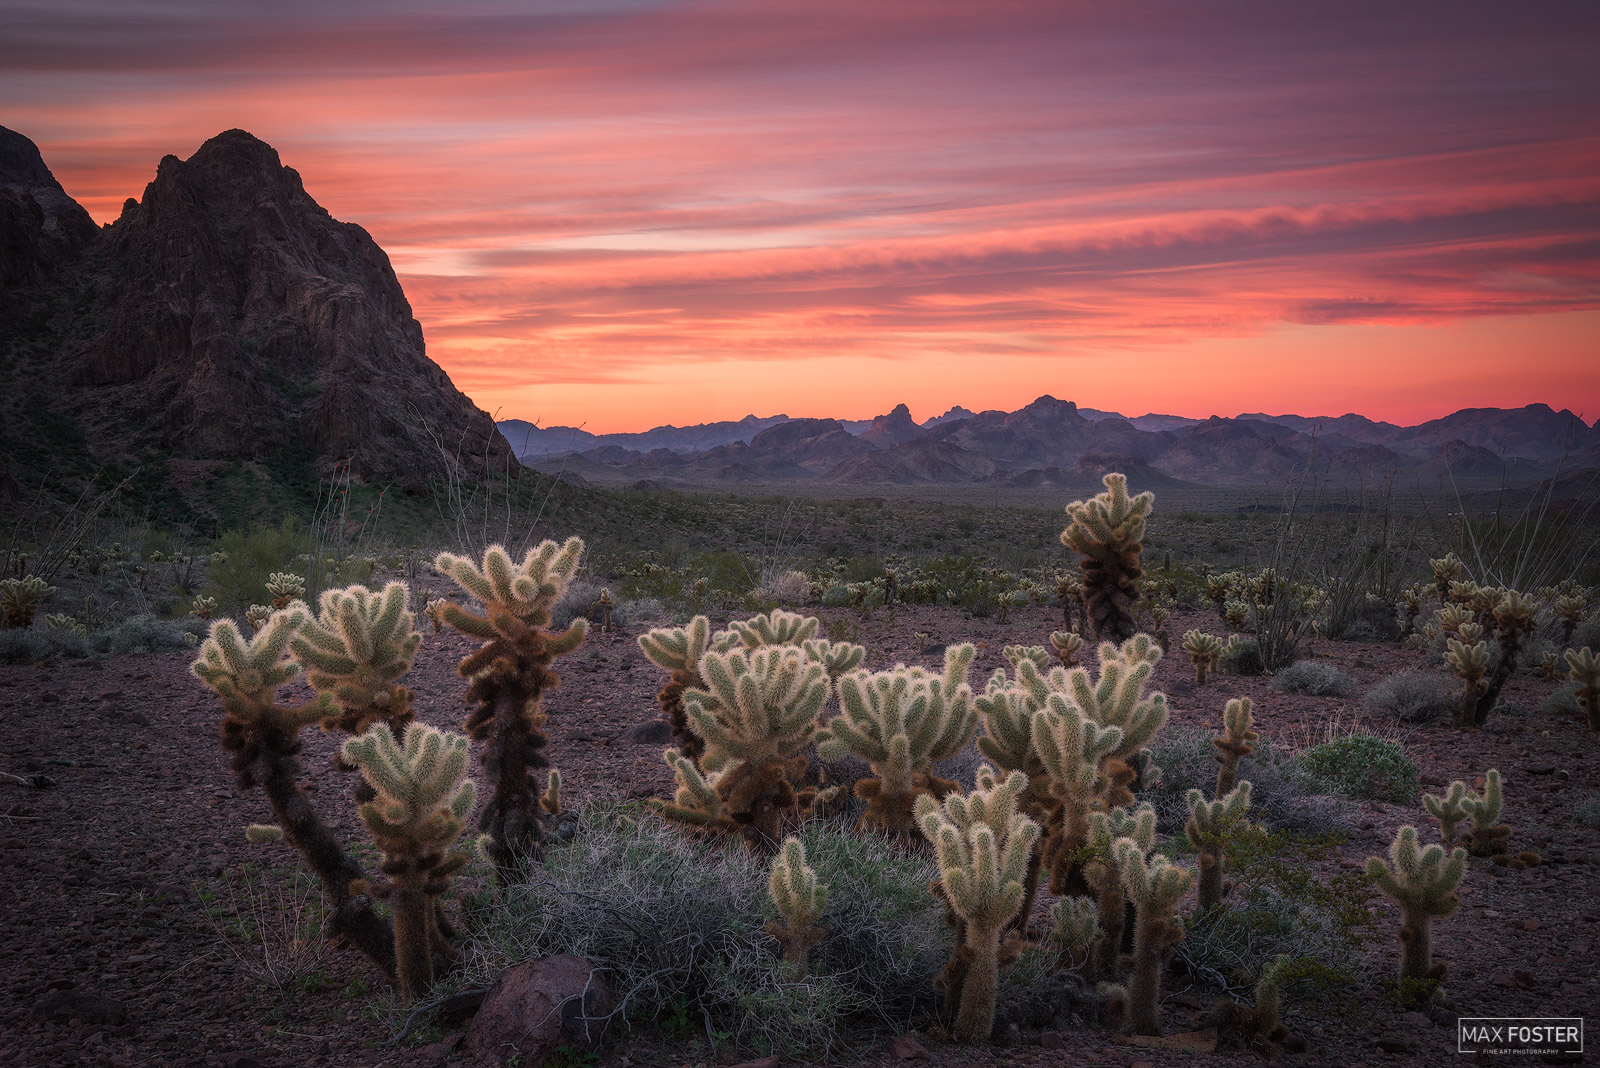 Refresh your space with In The Morning Light, Max Foster's limited edition photography print of Kofa National Wildlife Refuge...